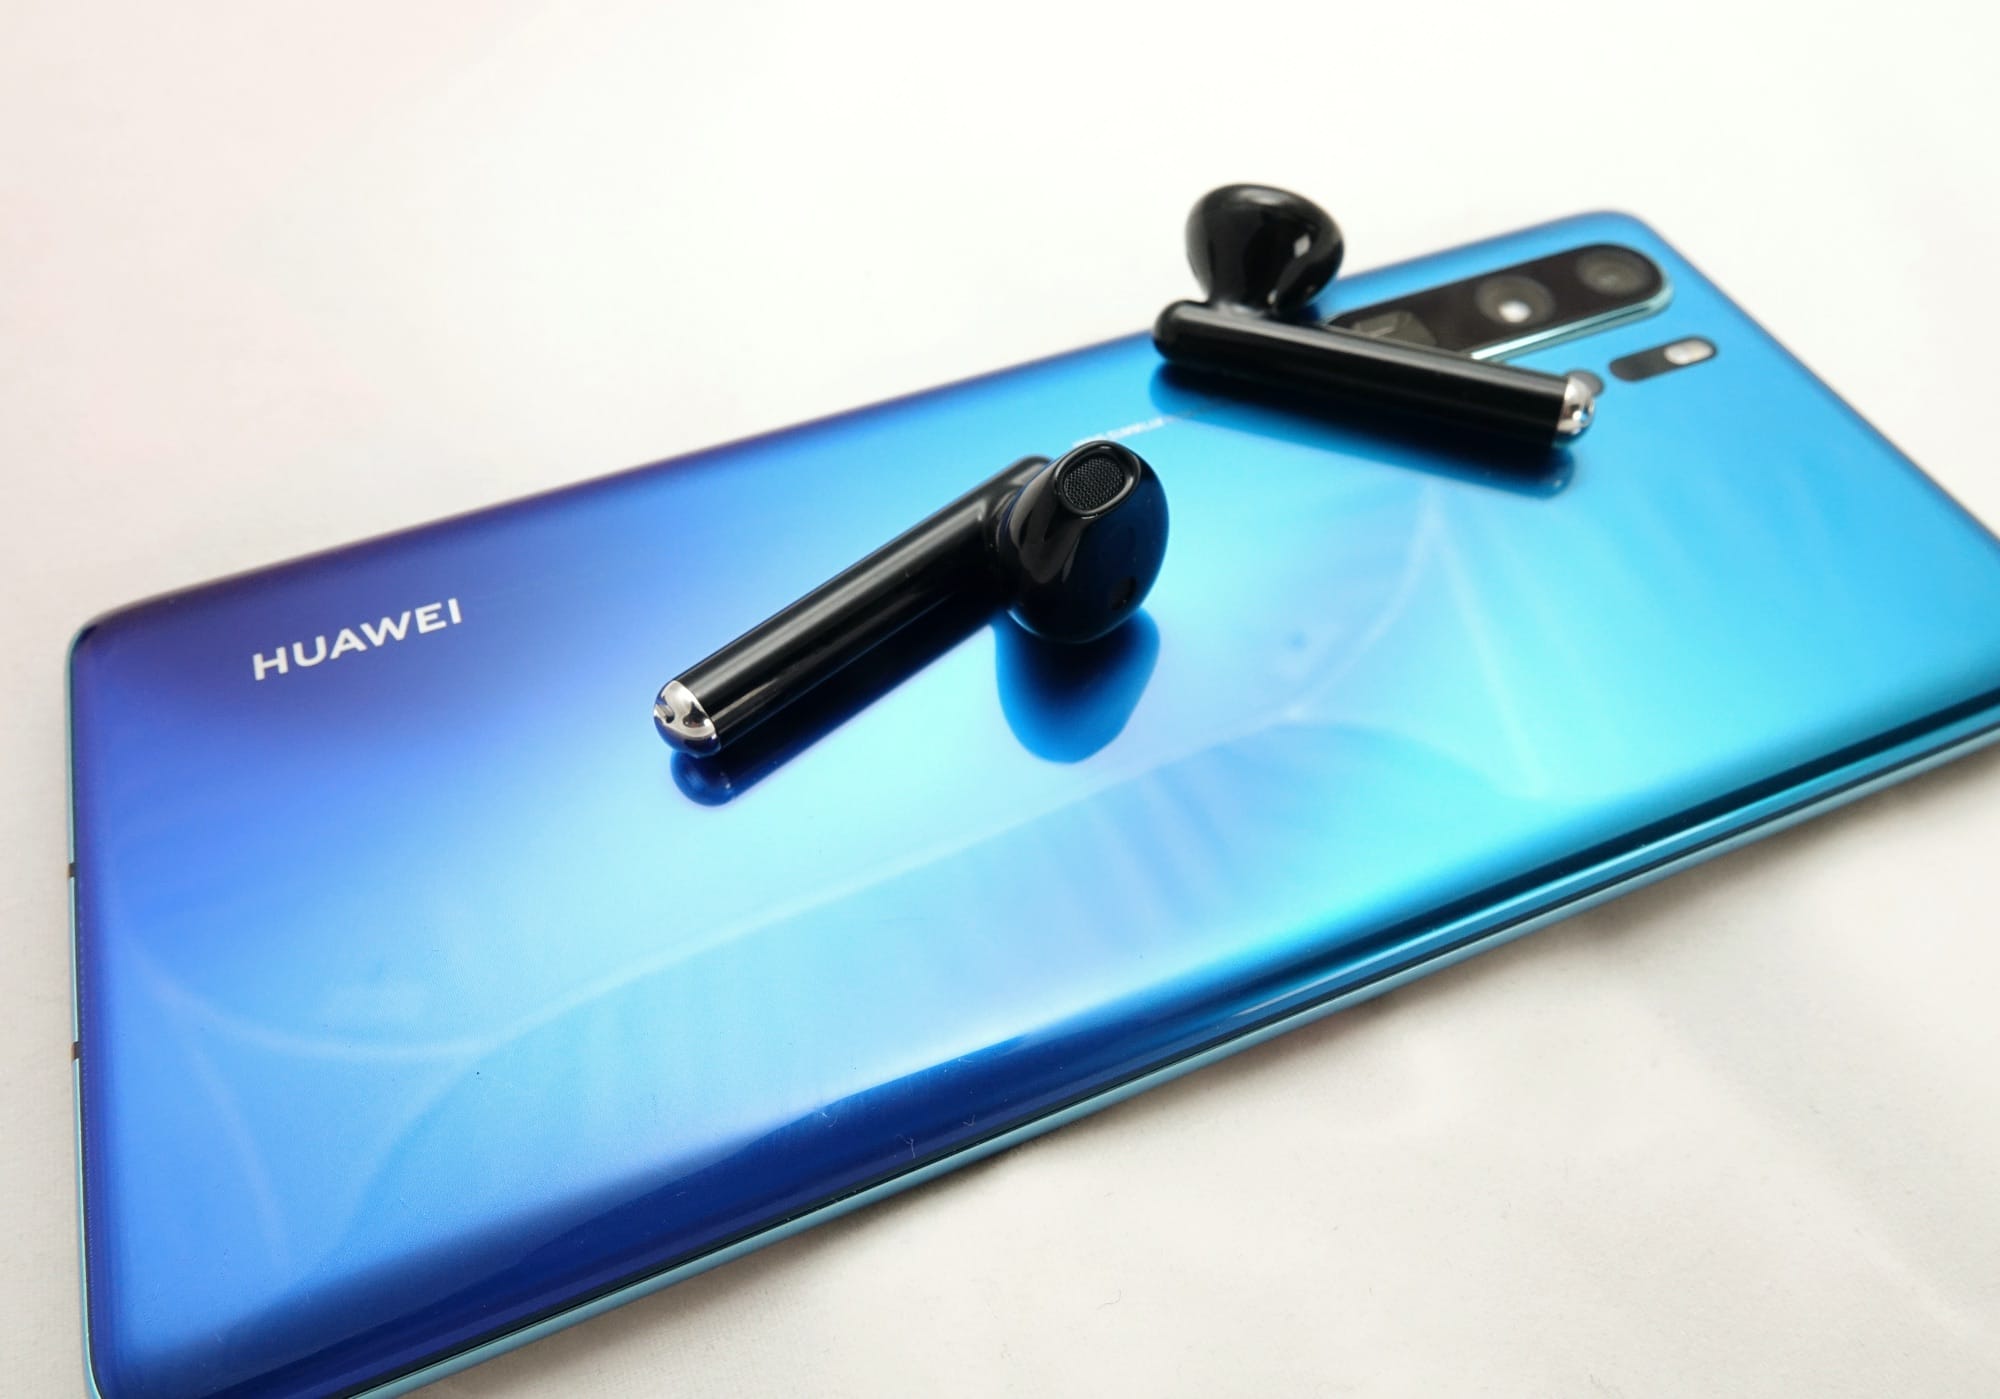 Huawei P30 review: This phone takes ridiculous photos for a